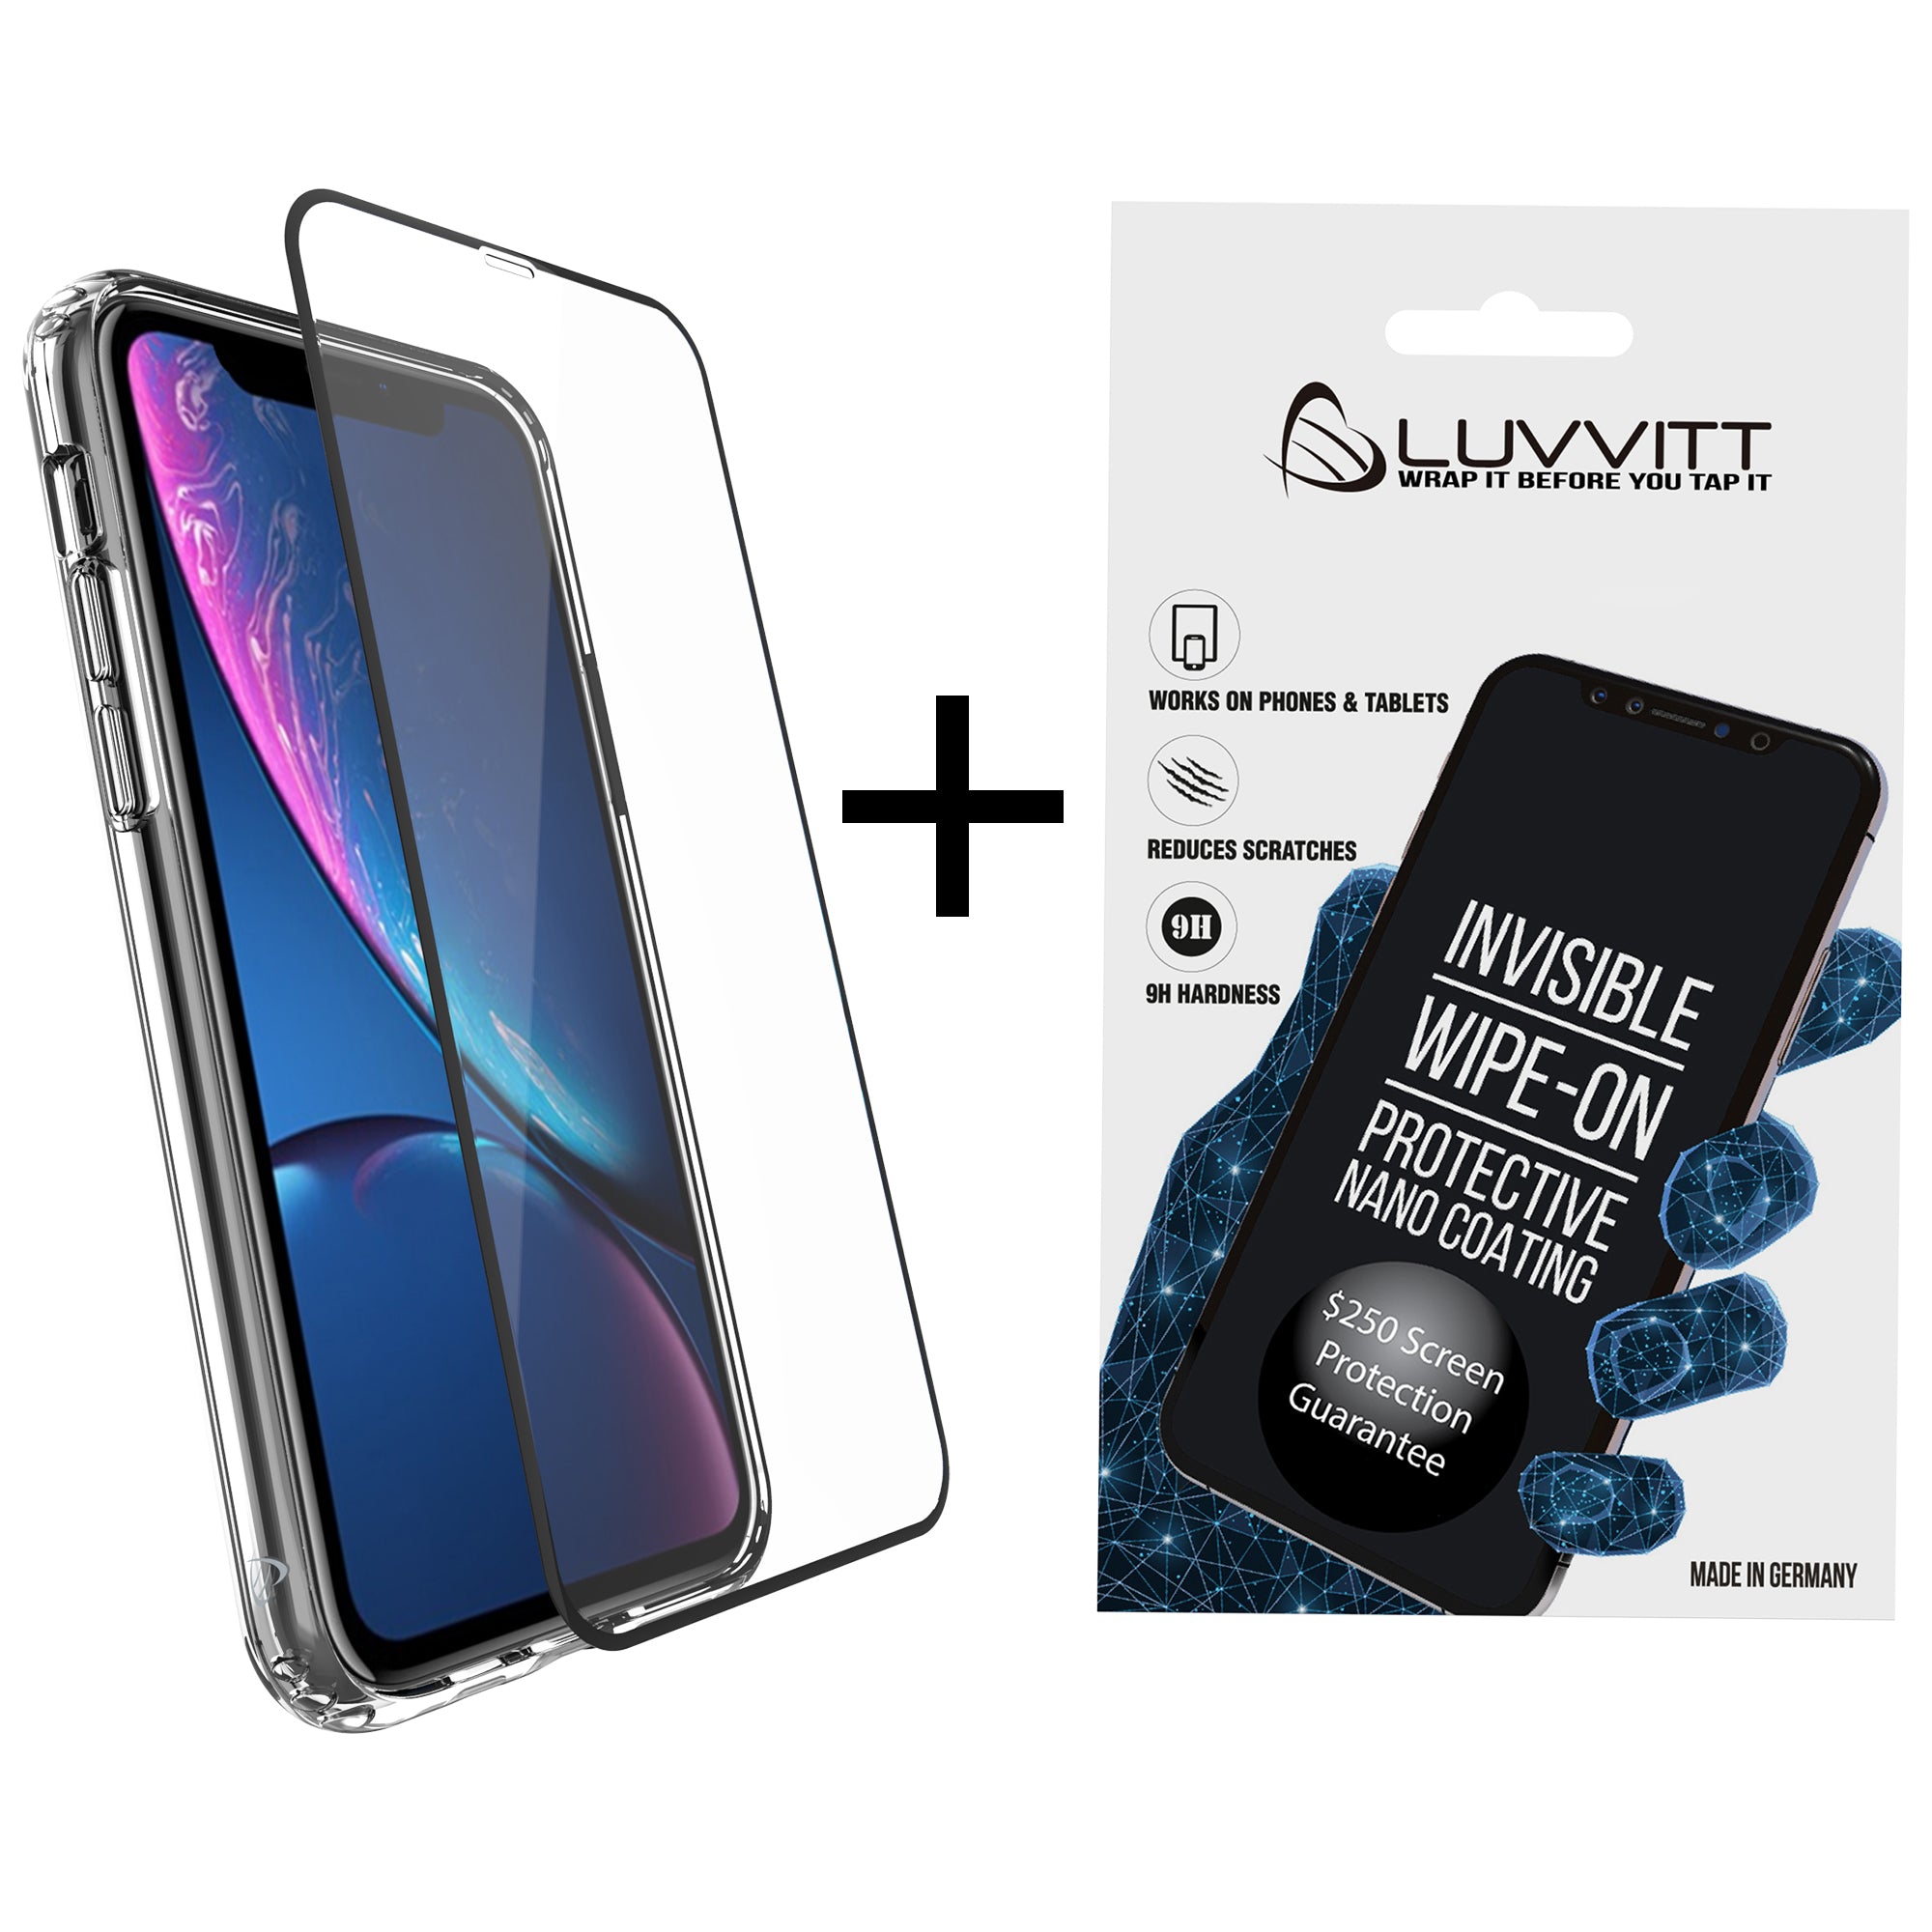 Luvvitt $250 Screen Protection Guarantee Liquid Glass + Tempered Glass Protector Bundle for iPhone 11 Pro 2019